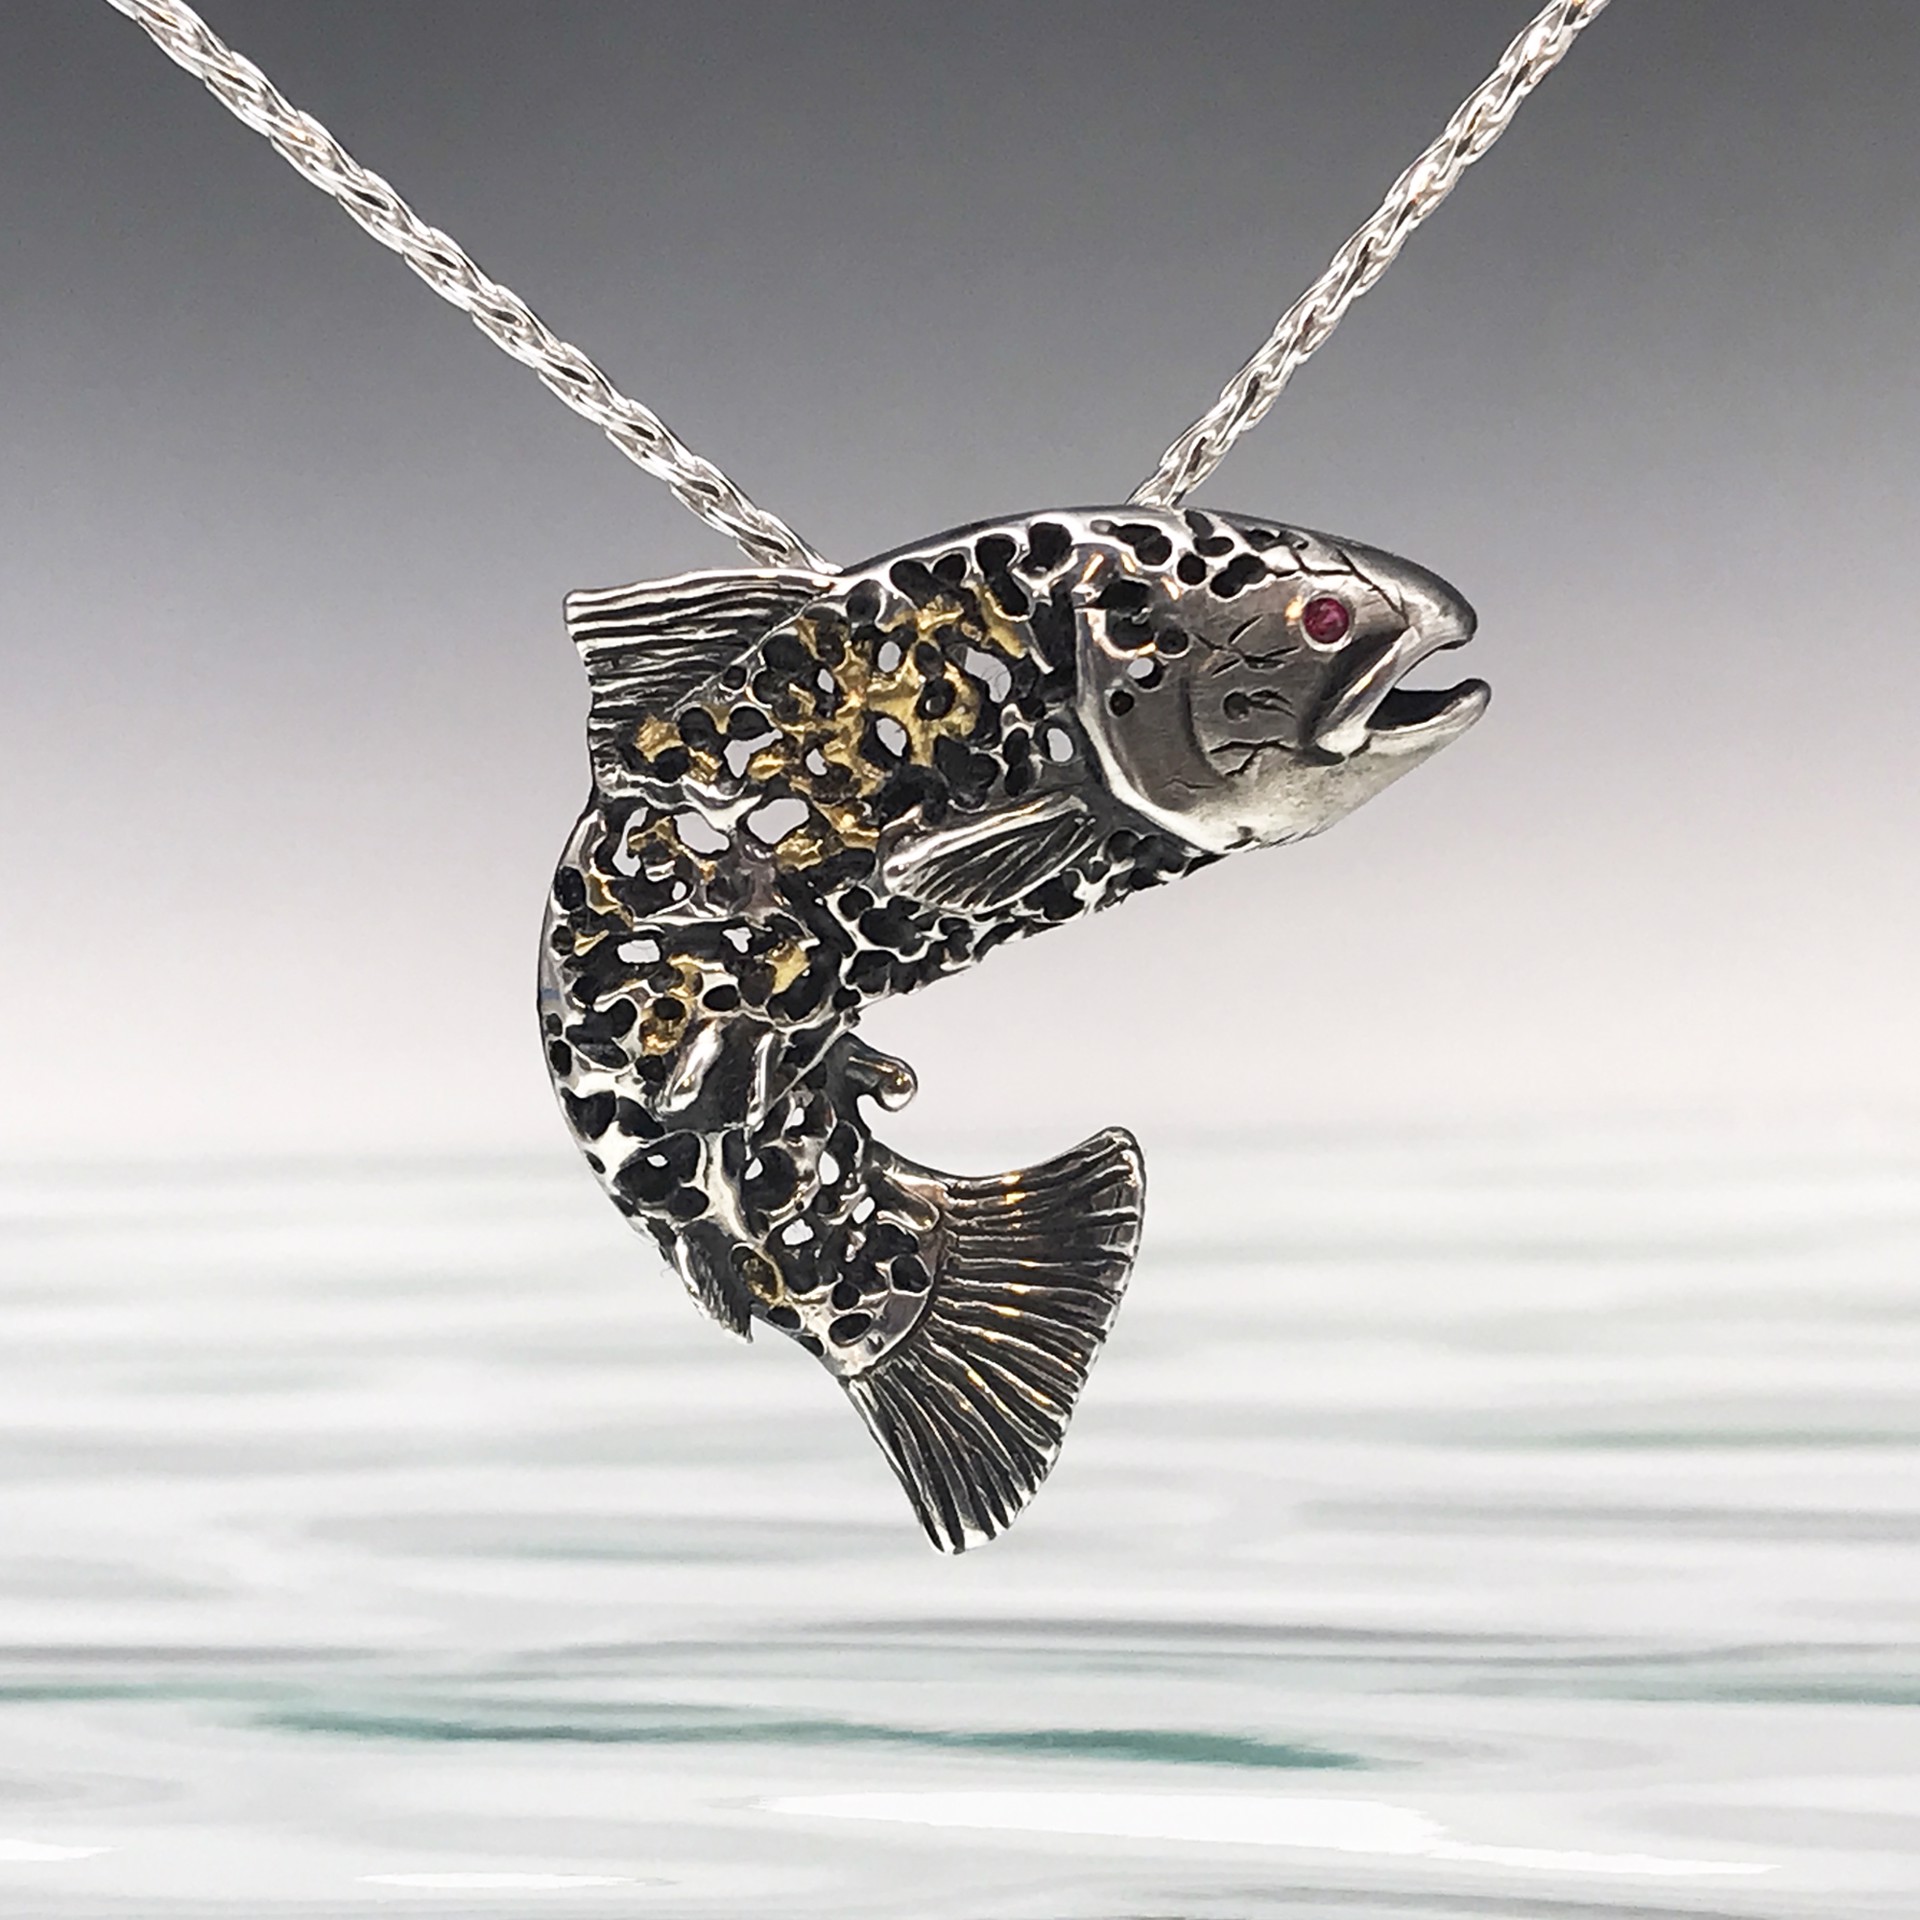 Ghost Trout Pendant withRubies by Thomas Tietze